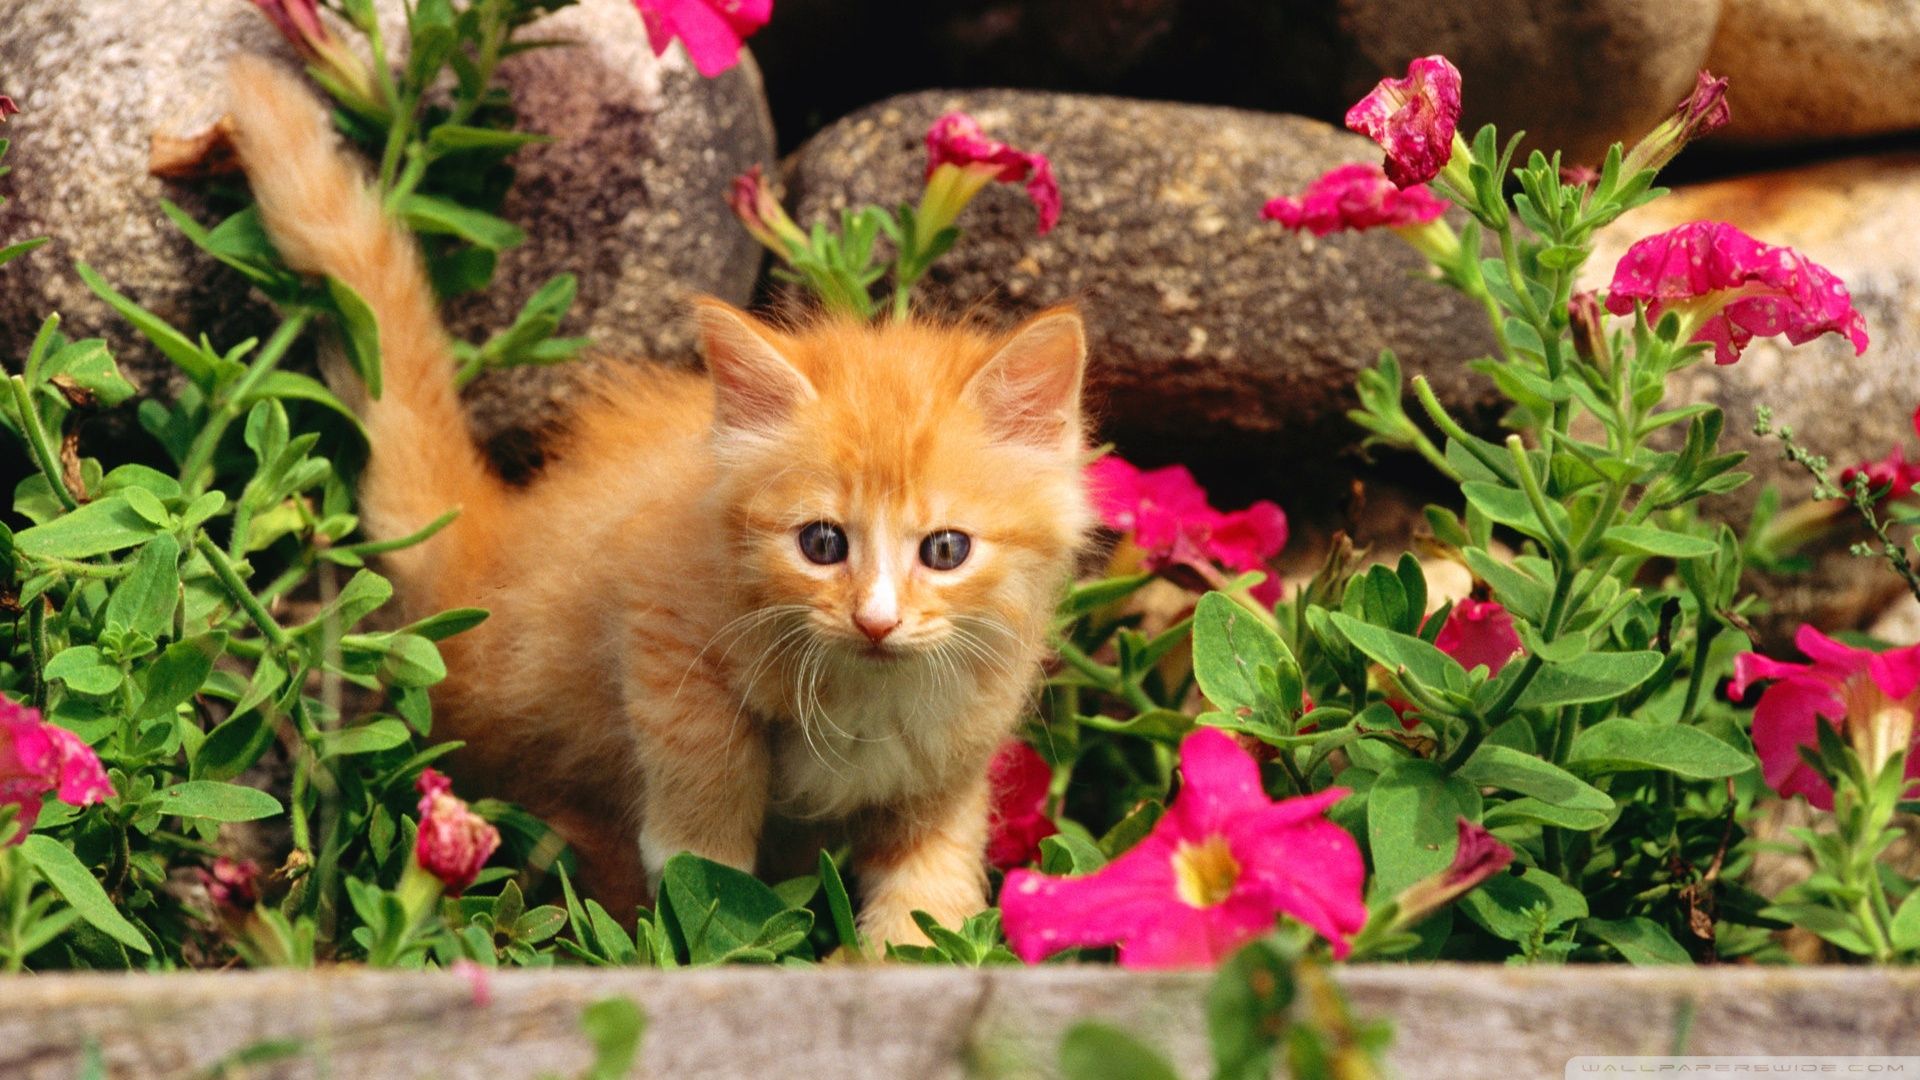 Free download spring wallpaper for cute cats and kittens Car Picture [1920x1080] for your Desktop, Mobile & Tablet. Explore Spring Wallpaper with Cats. Abstract Spring Desktop Wallpaper, Kitten Spring